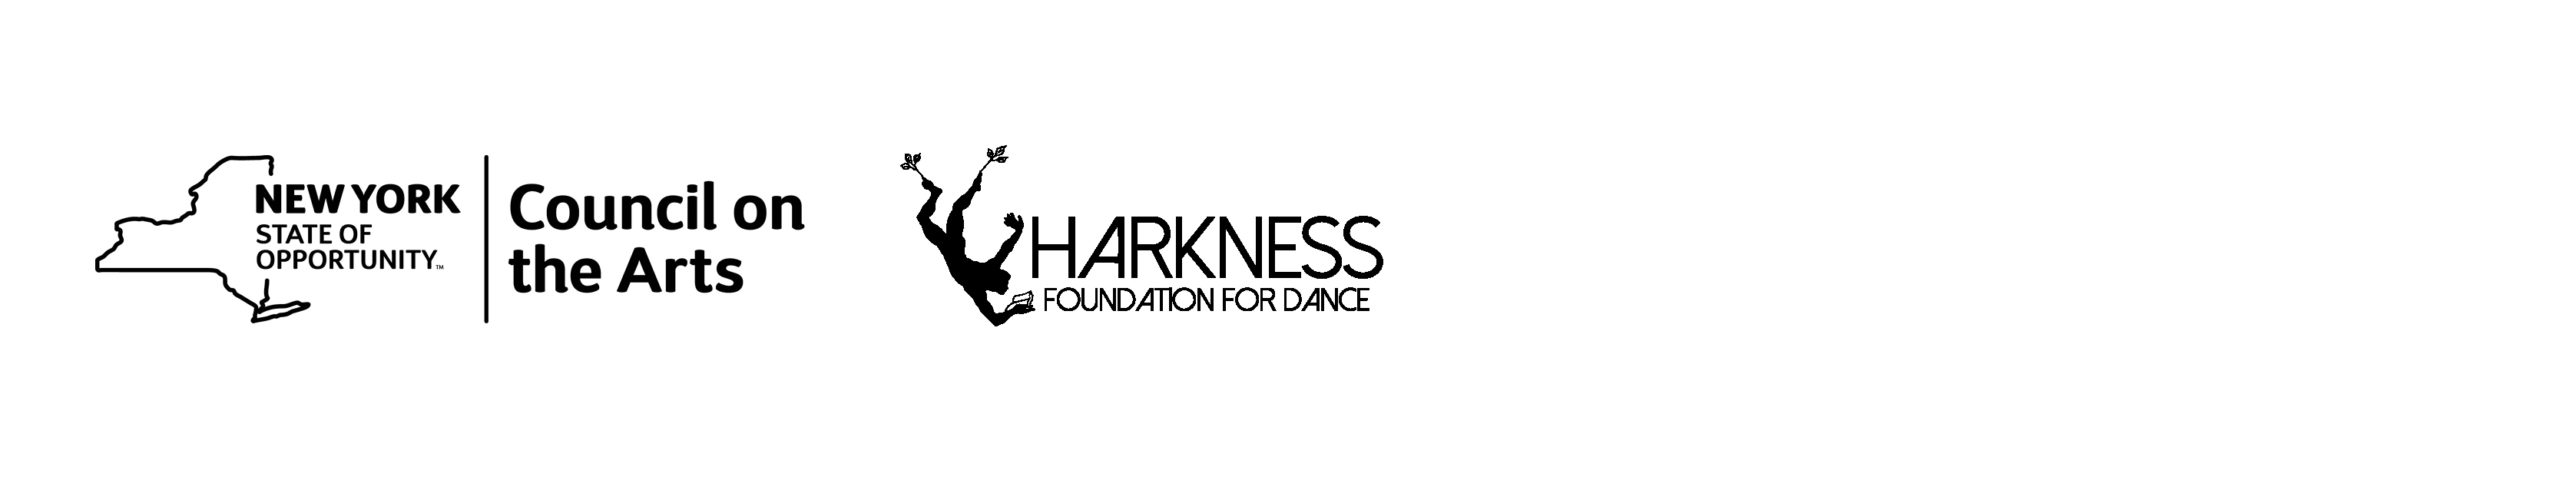 Harkness Foundation for Dance & NYSCA